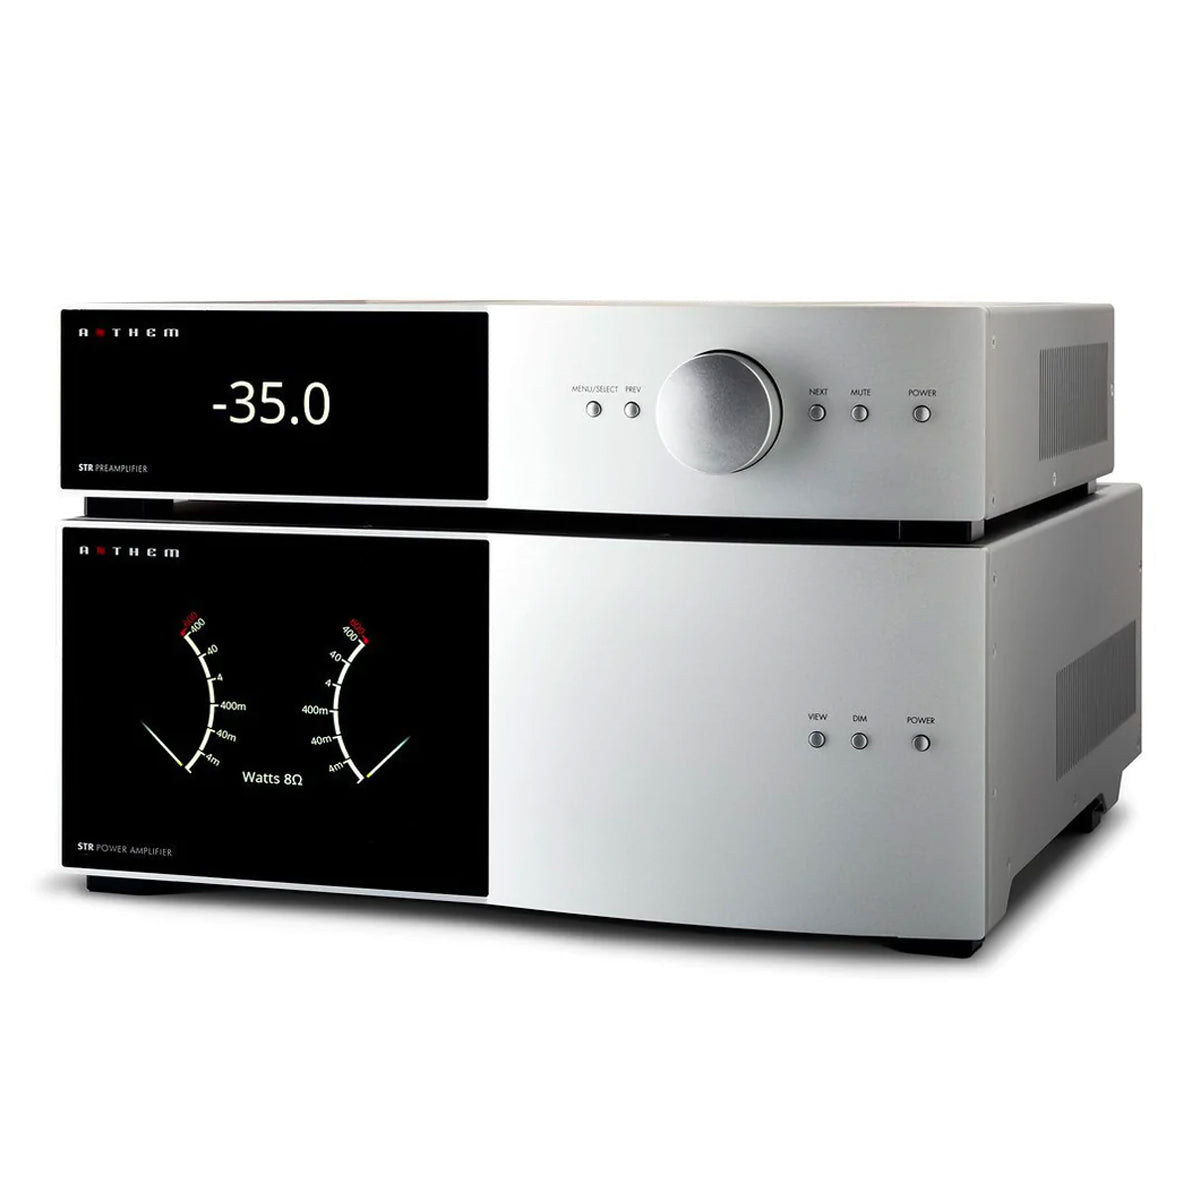 Anthem STR Power Amplifier - Silver - The Audio Experts